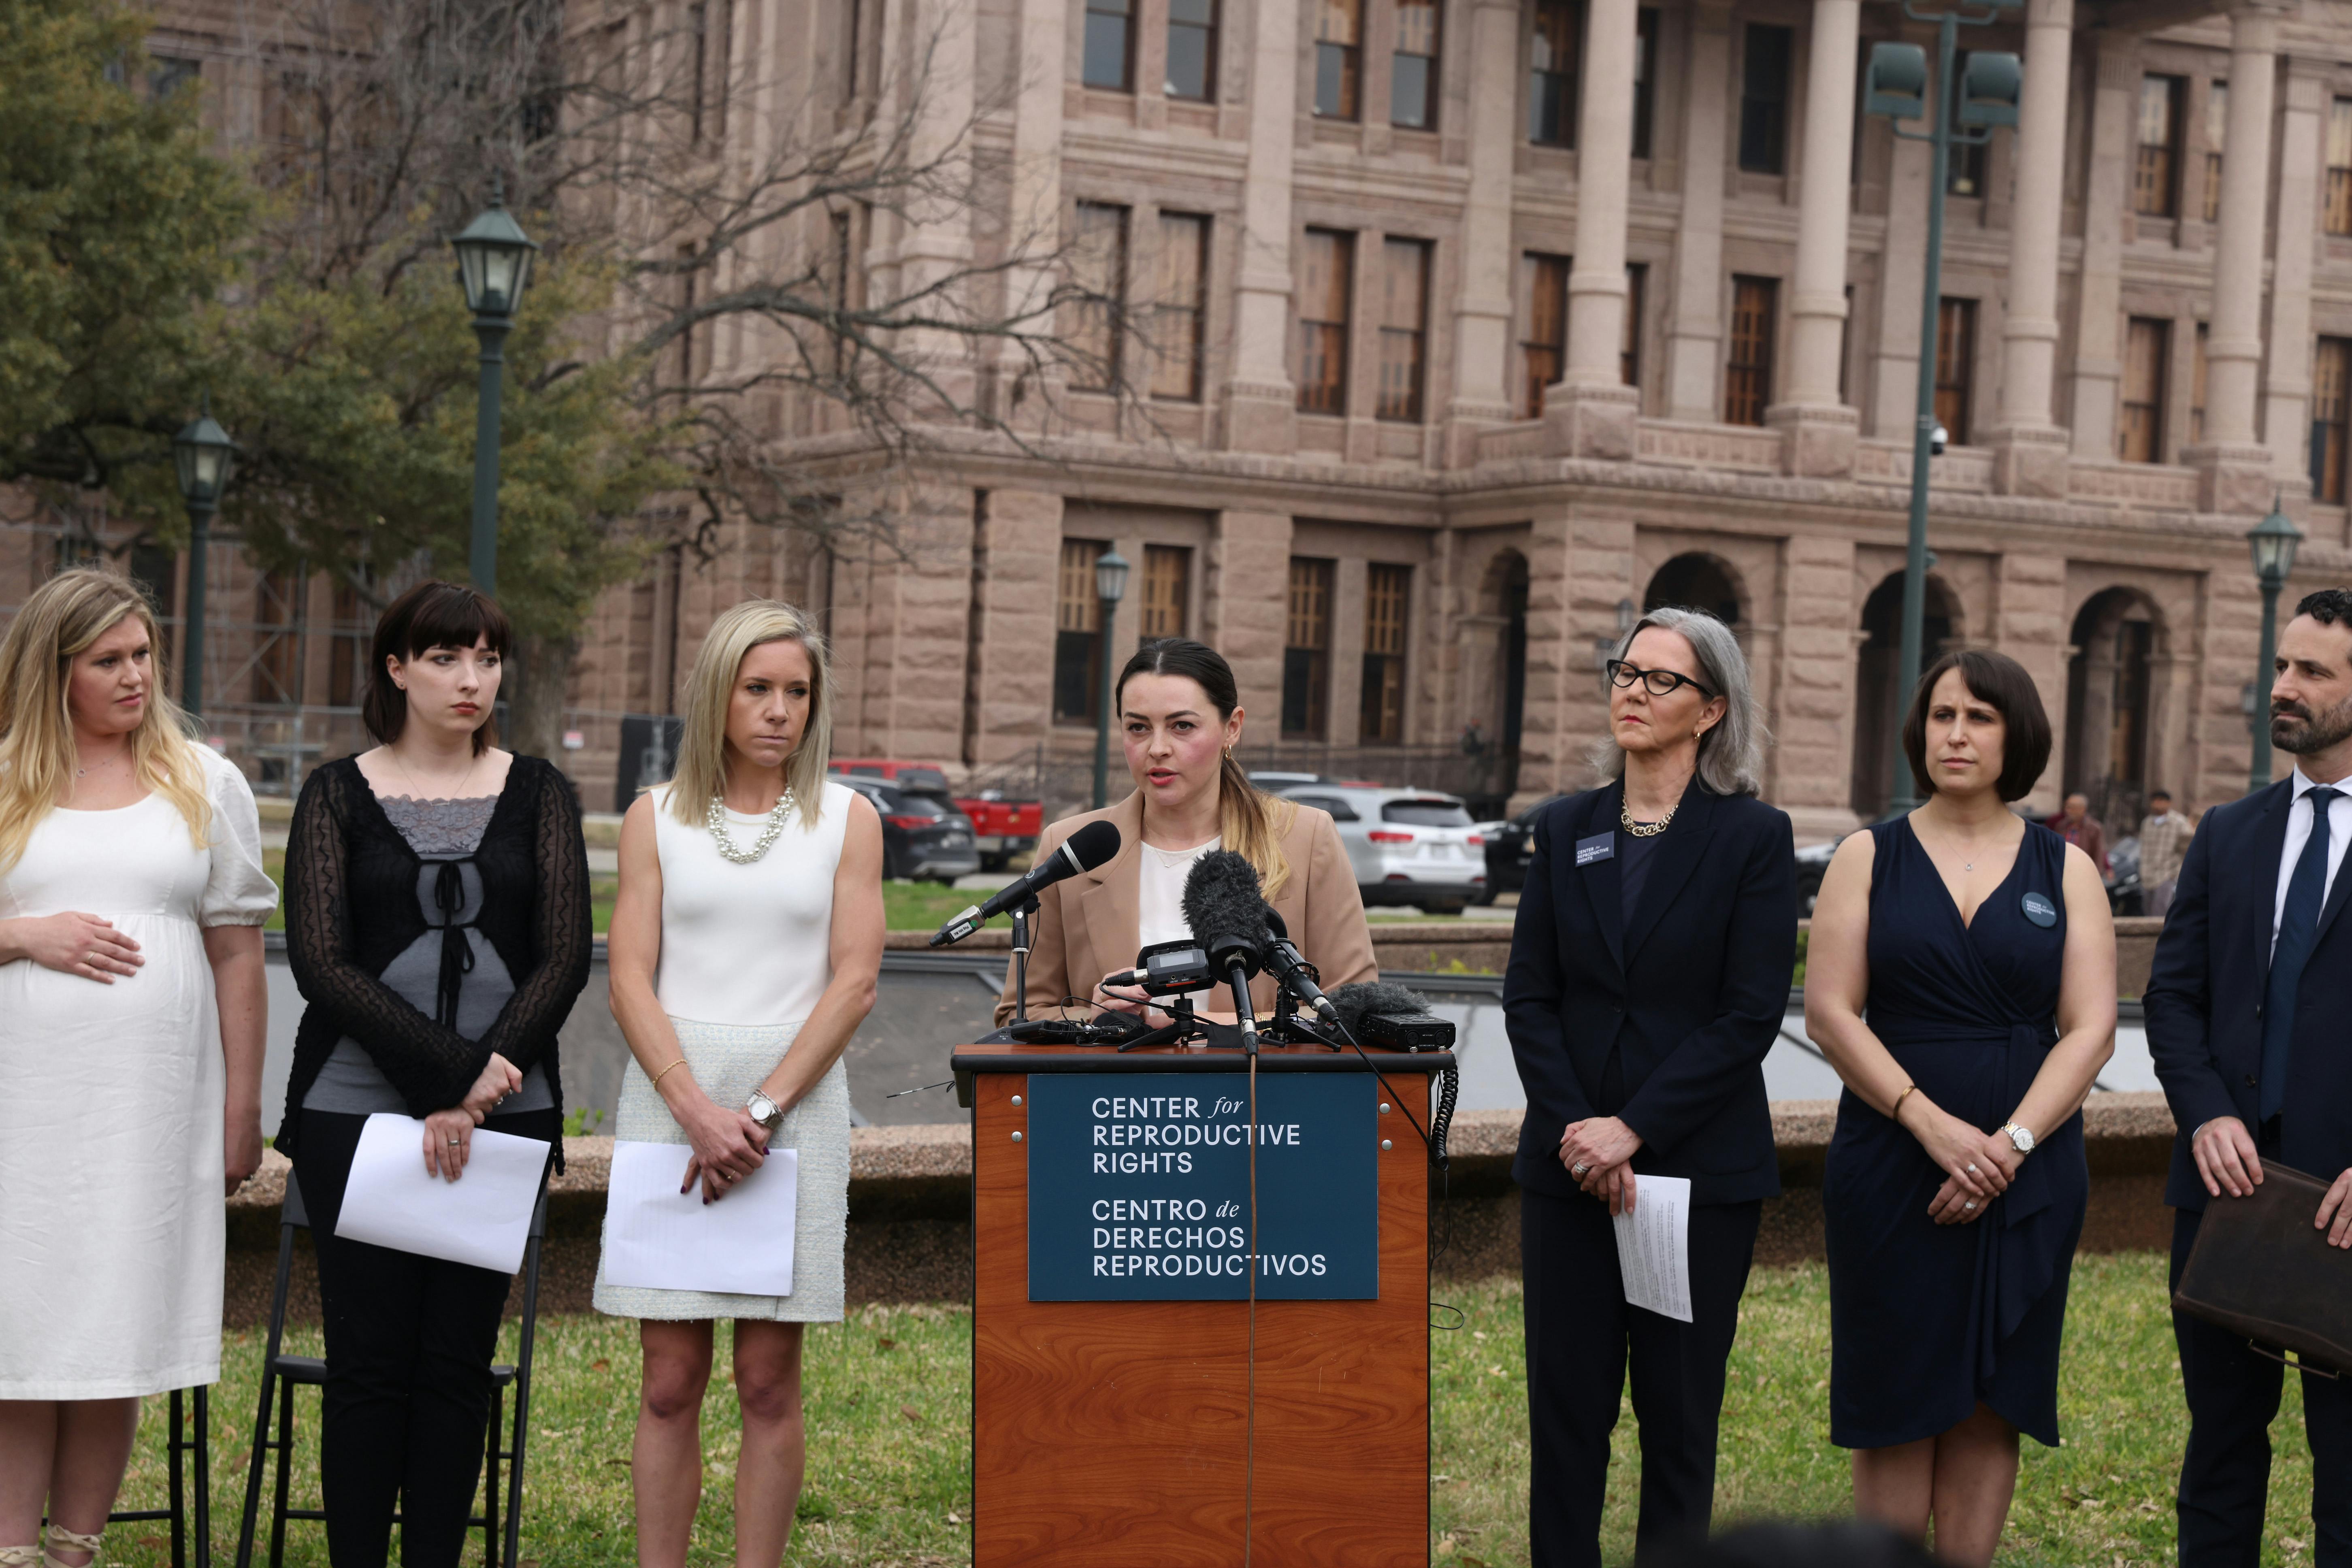 Woman Suing Texas Over Abortion Ban Vomits During Trial After Reliving Trauma The New Republic